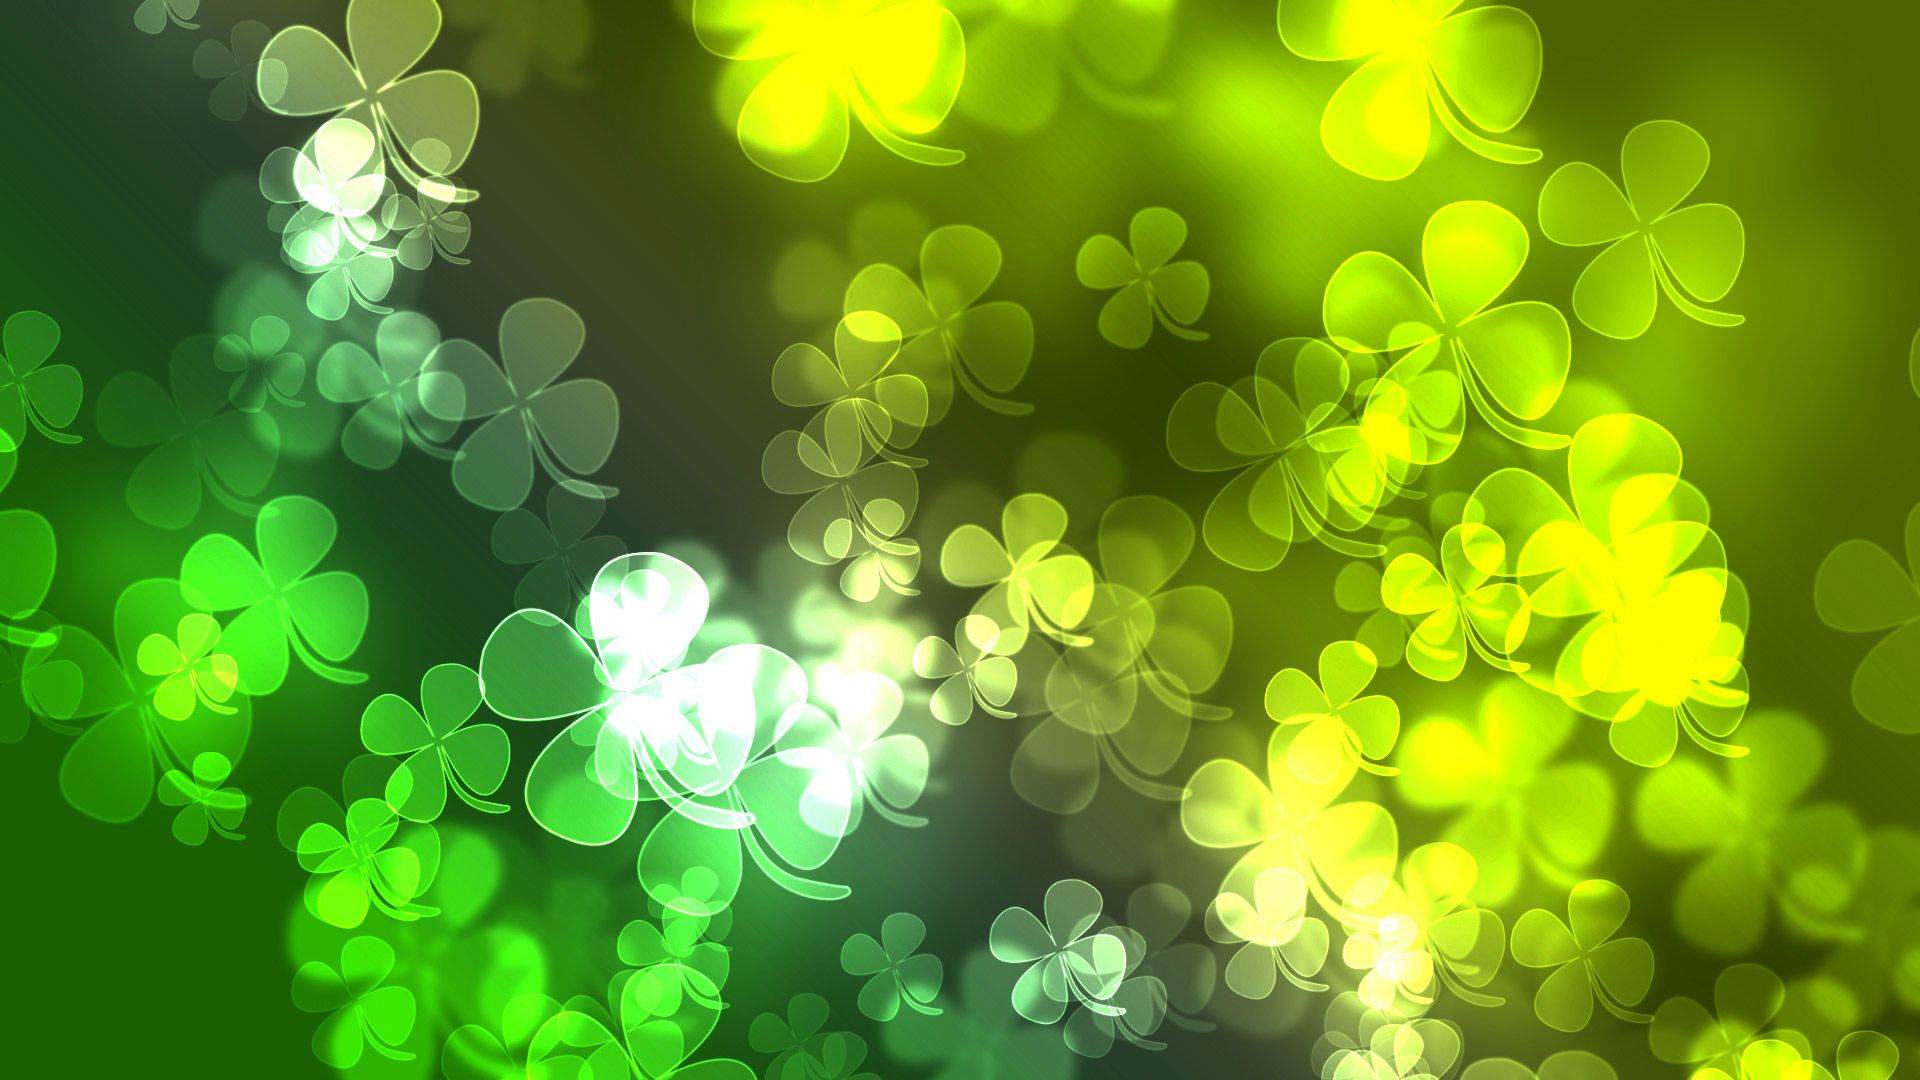 23 St. Patricks Day themed wallpapers for your Android AndroidGuys